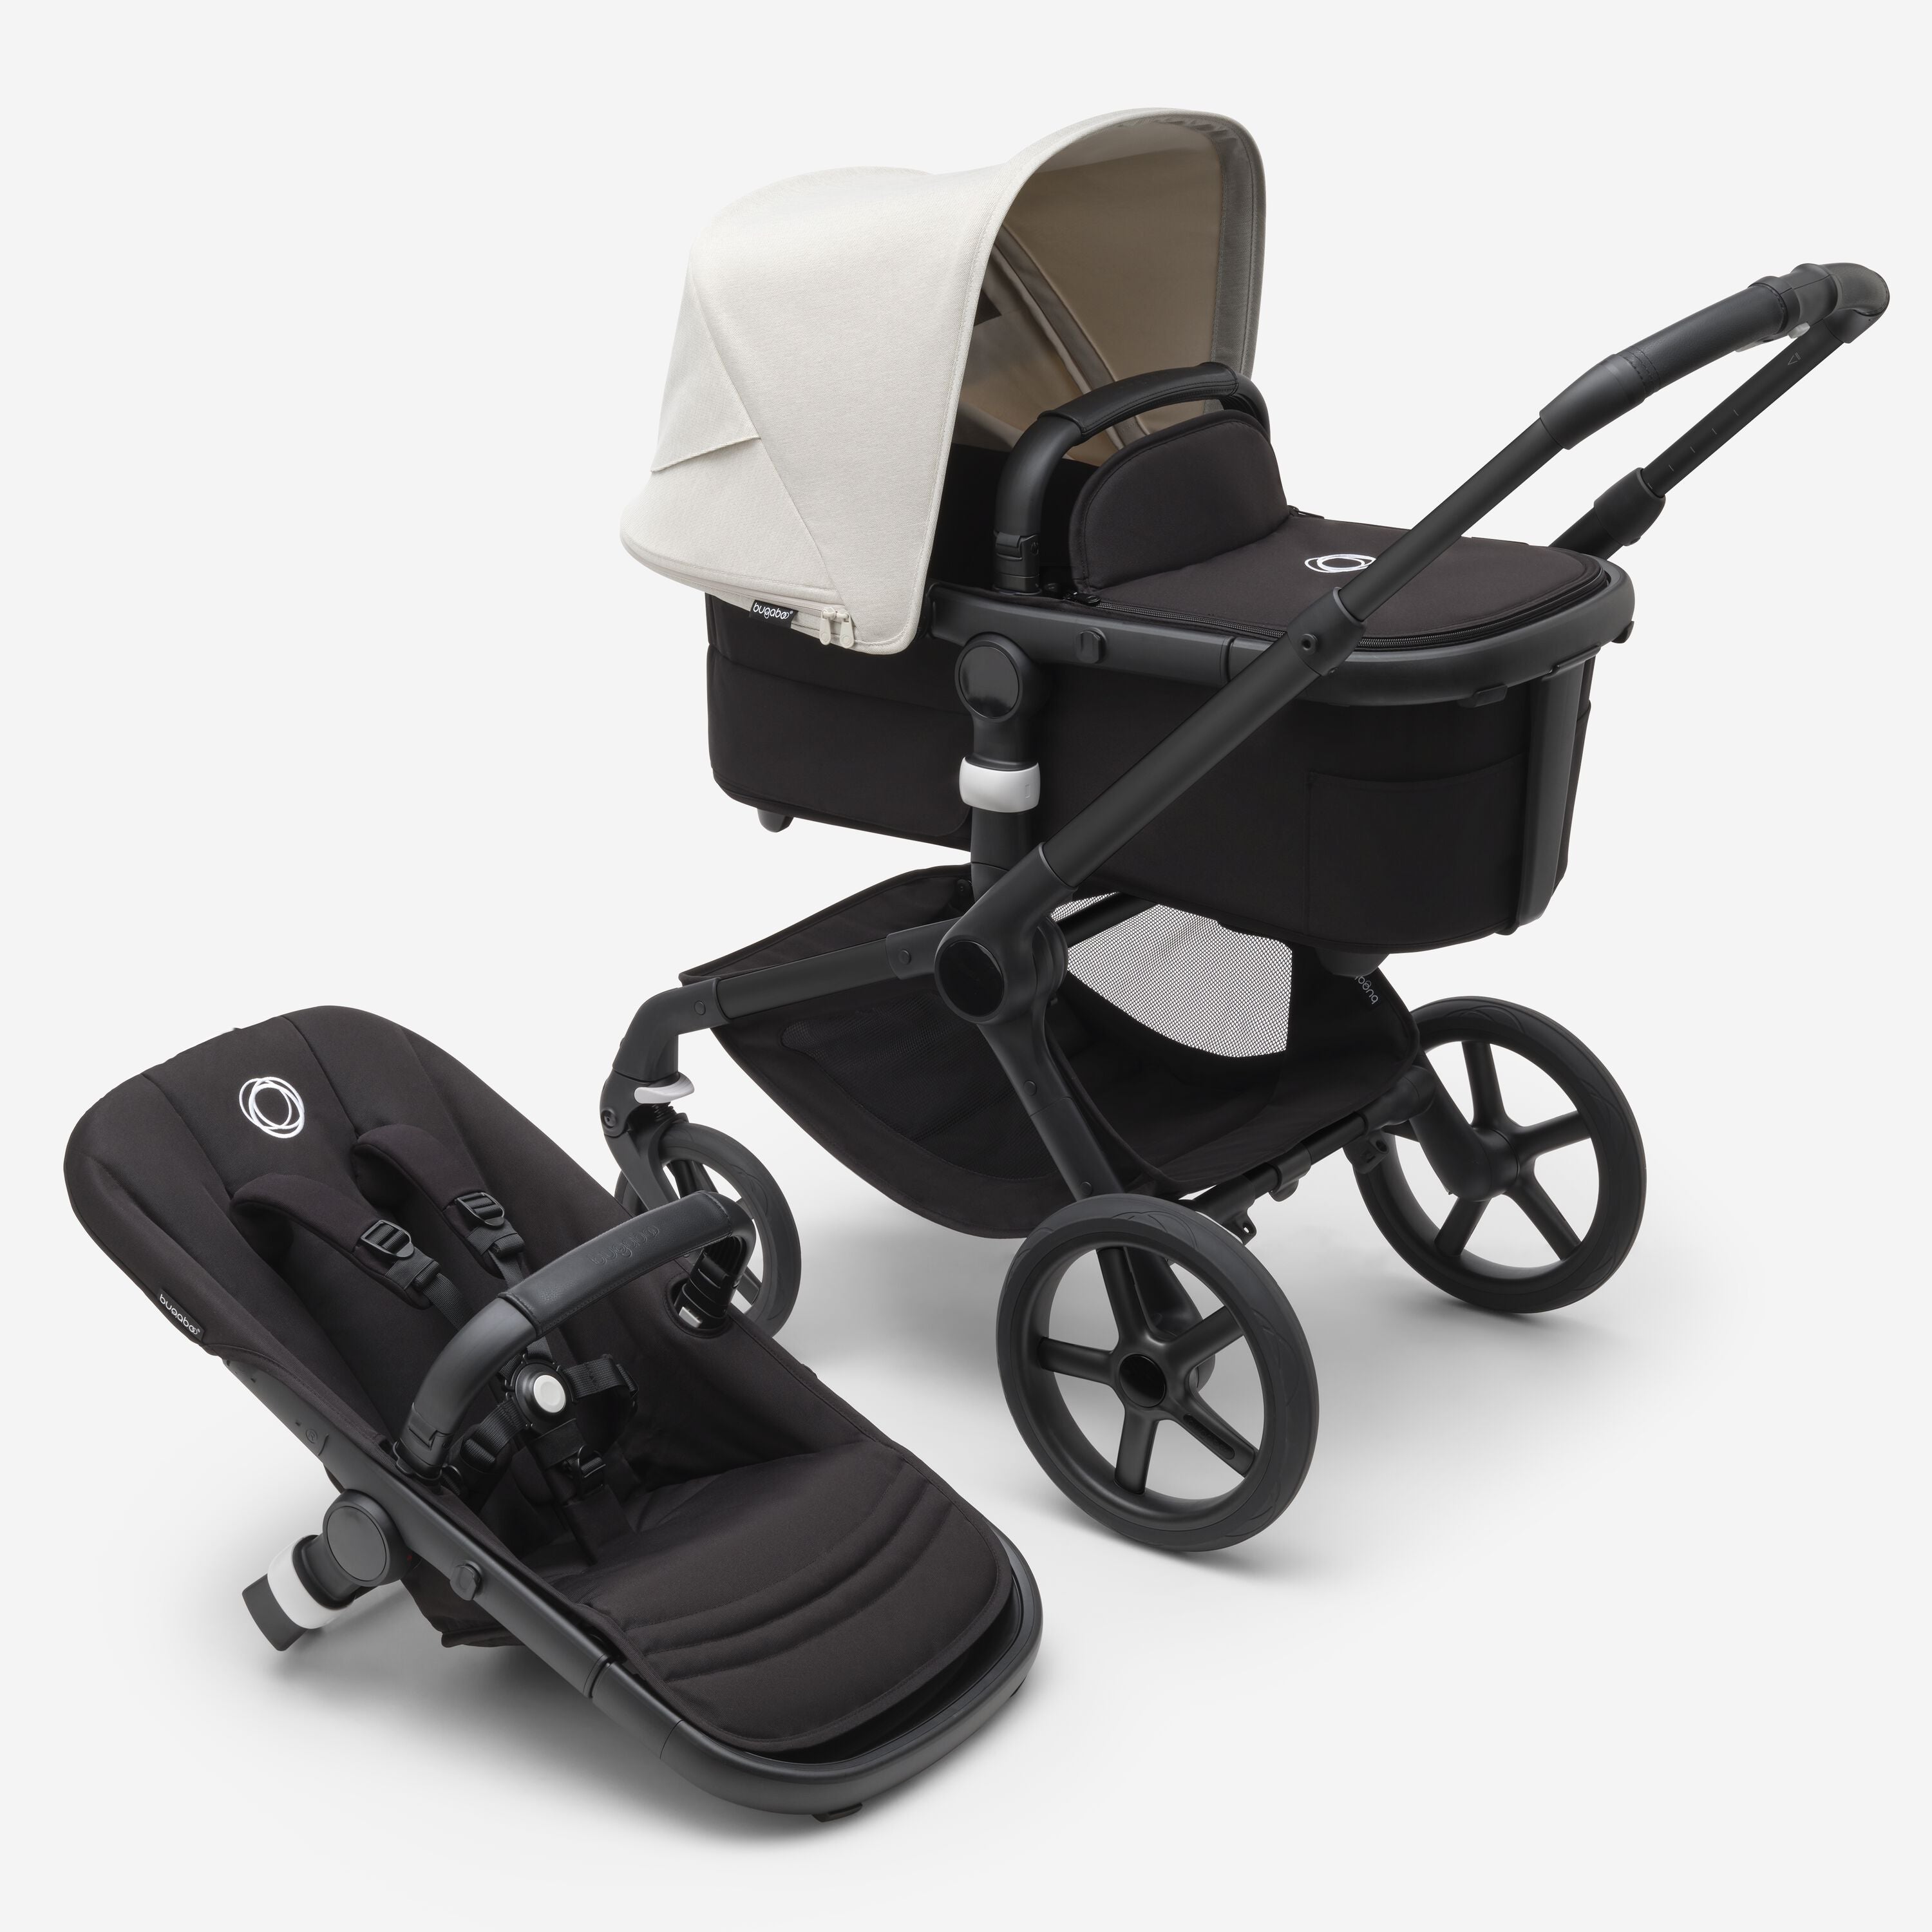 Used Bugaboo Products for Sale - Stork Exchange